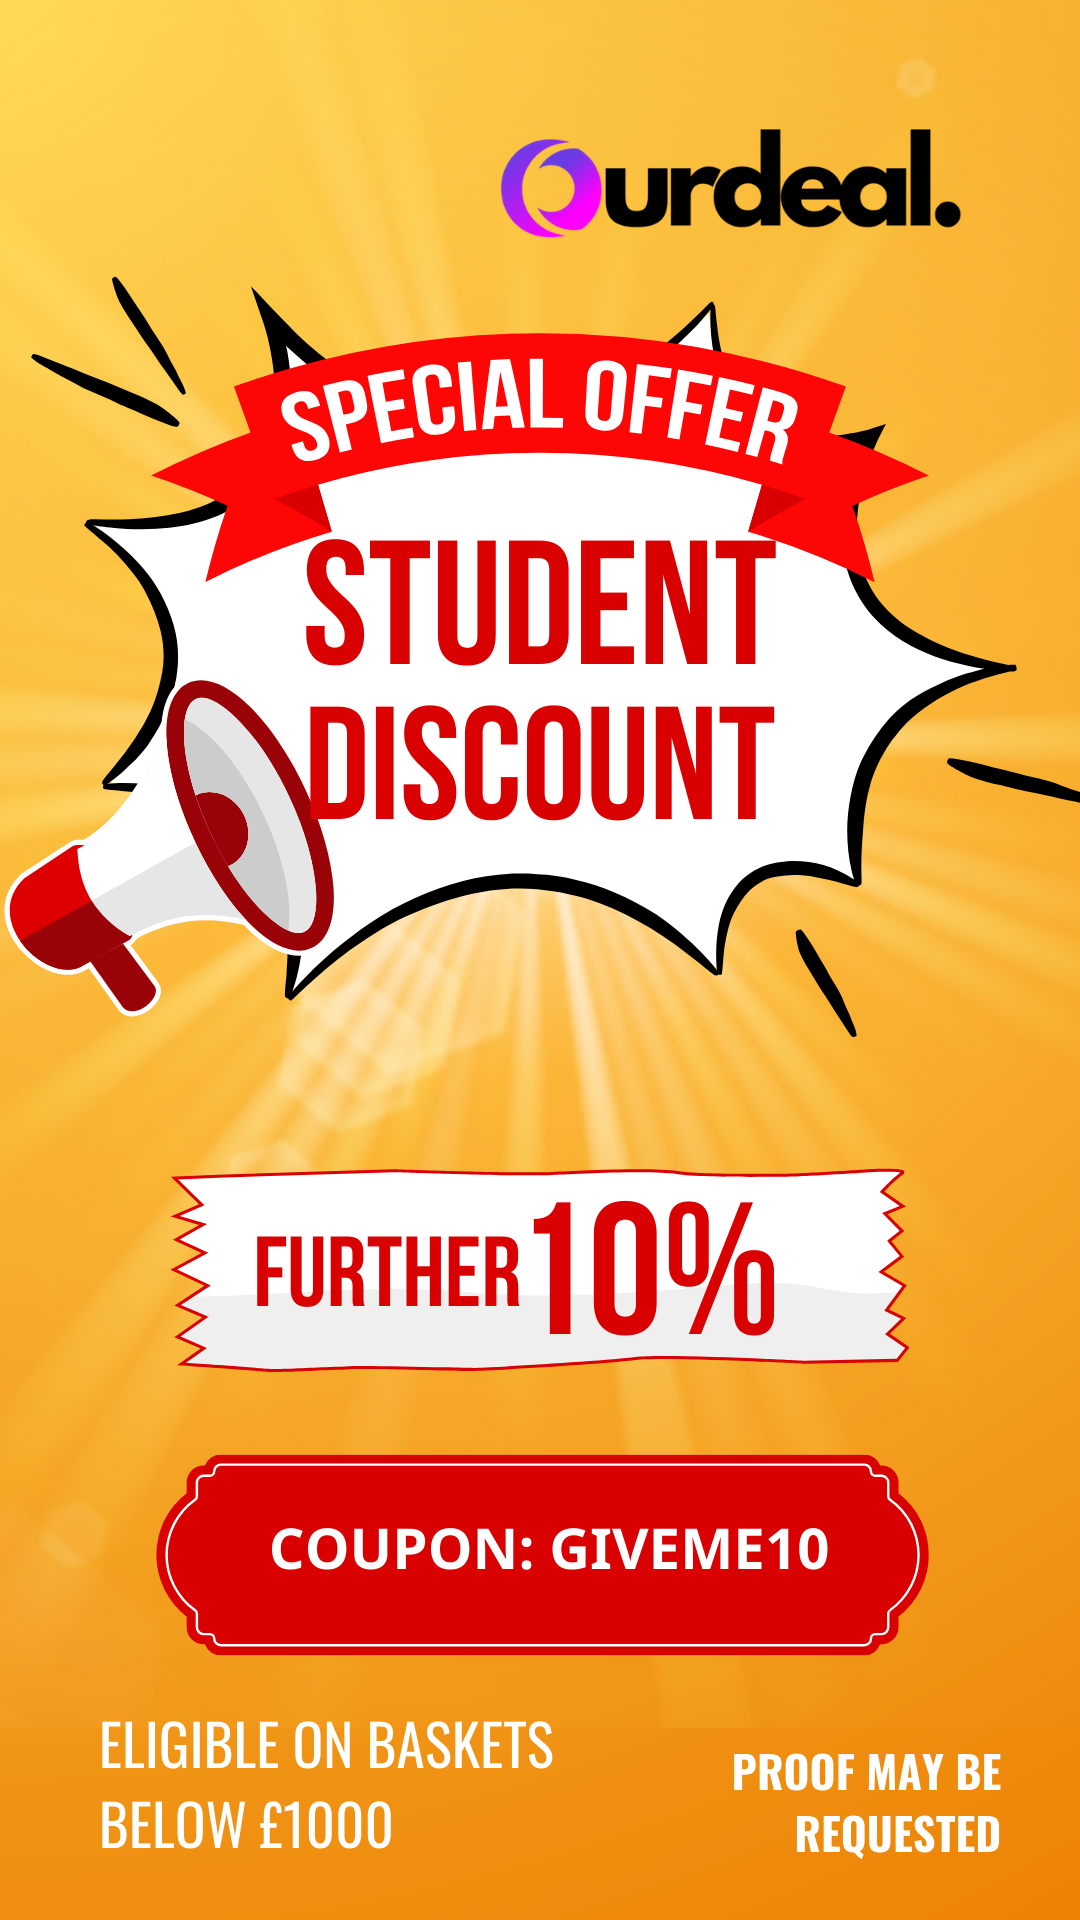 ourdeal student discount